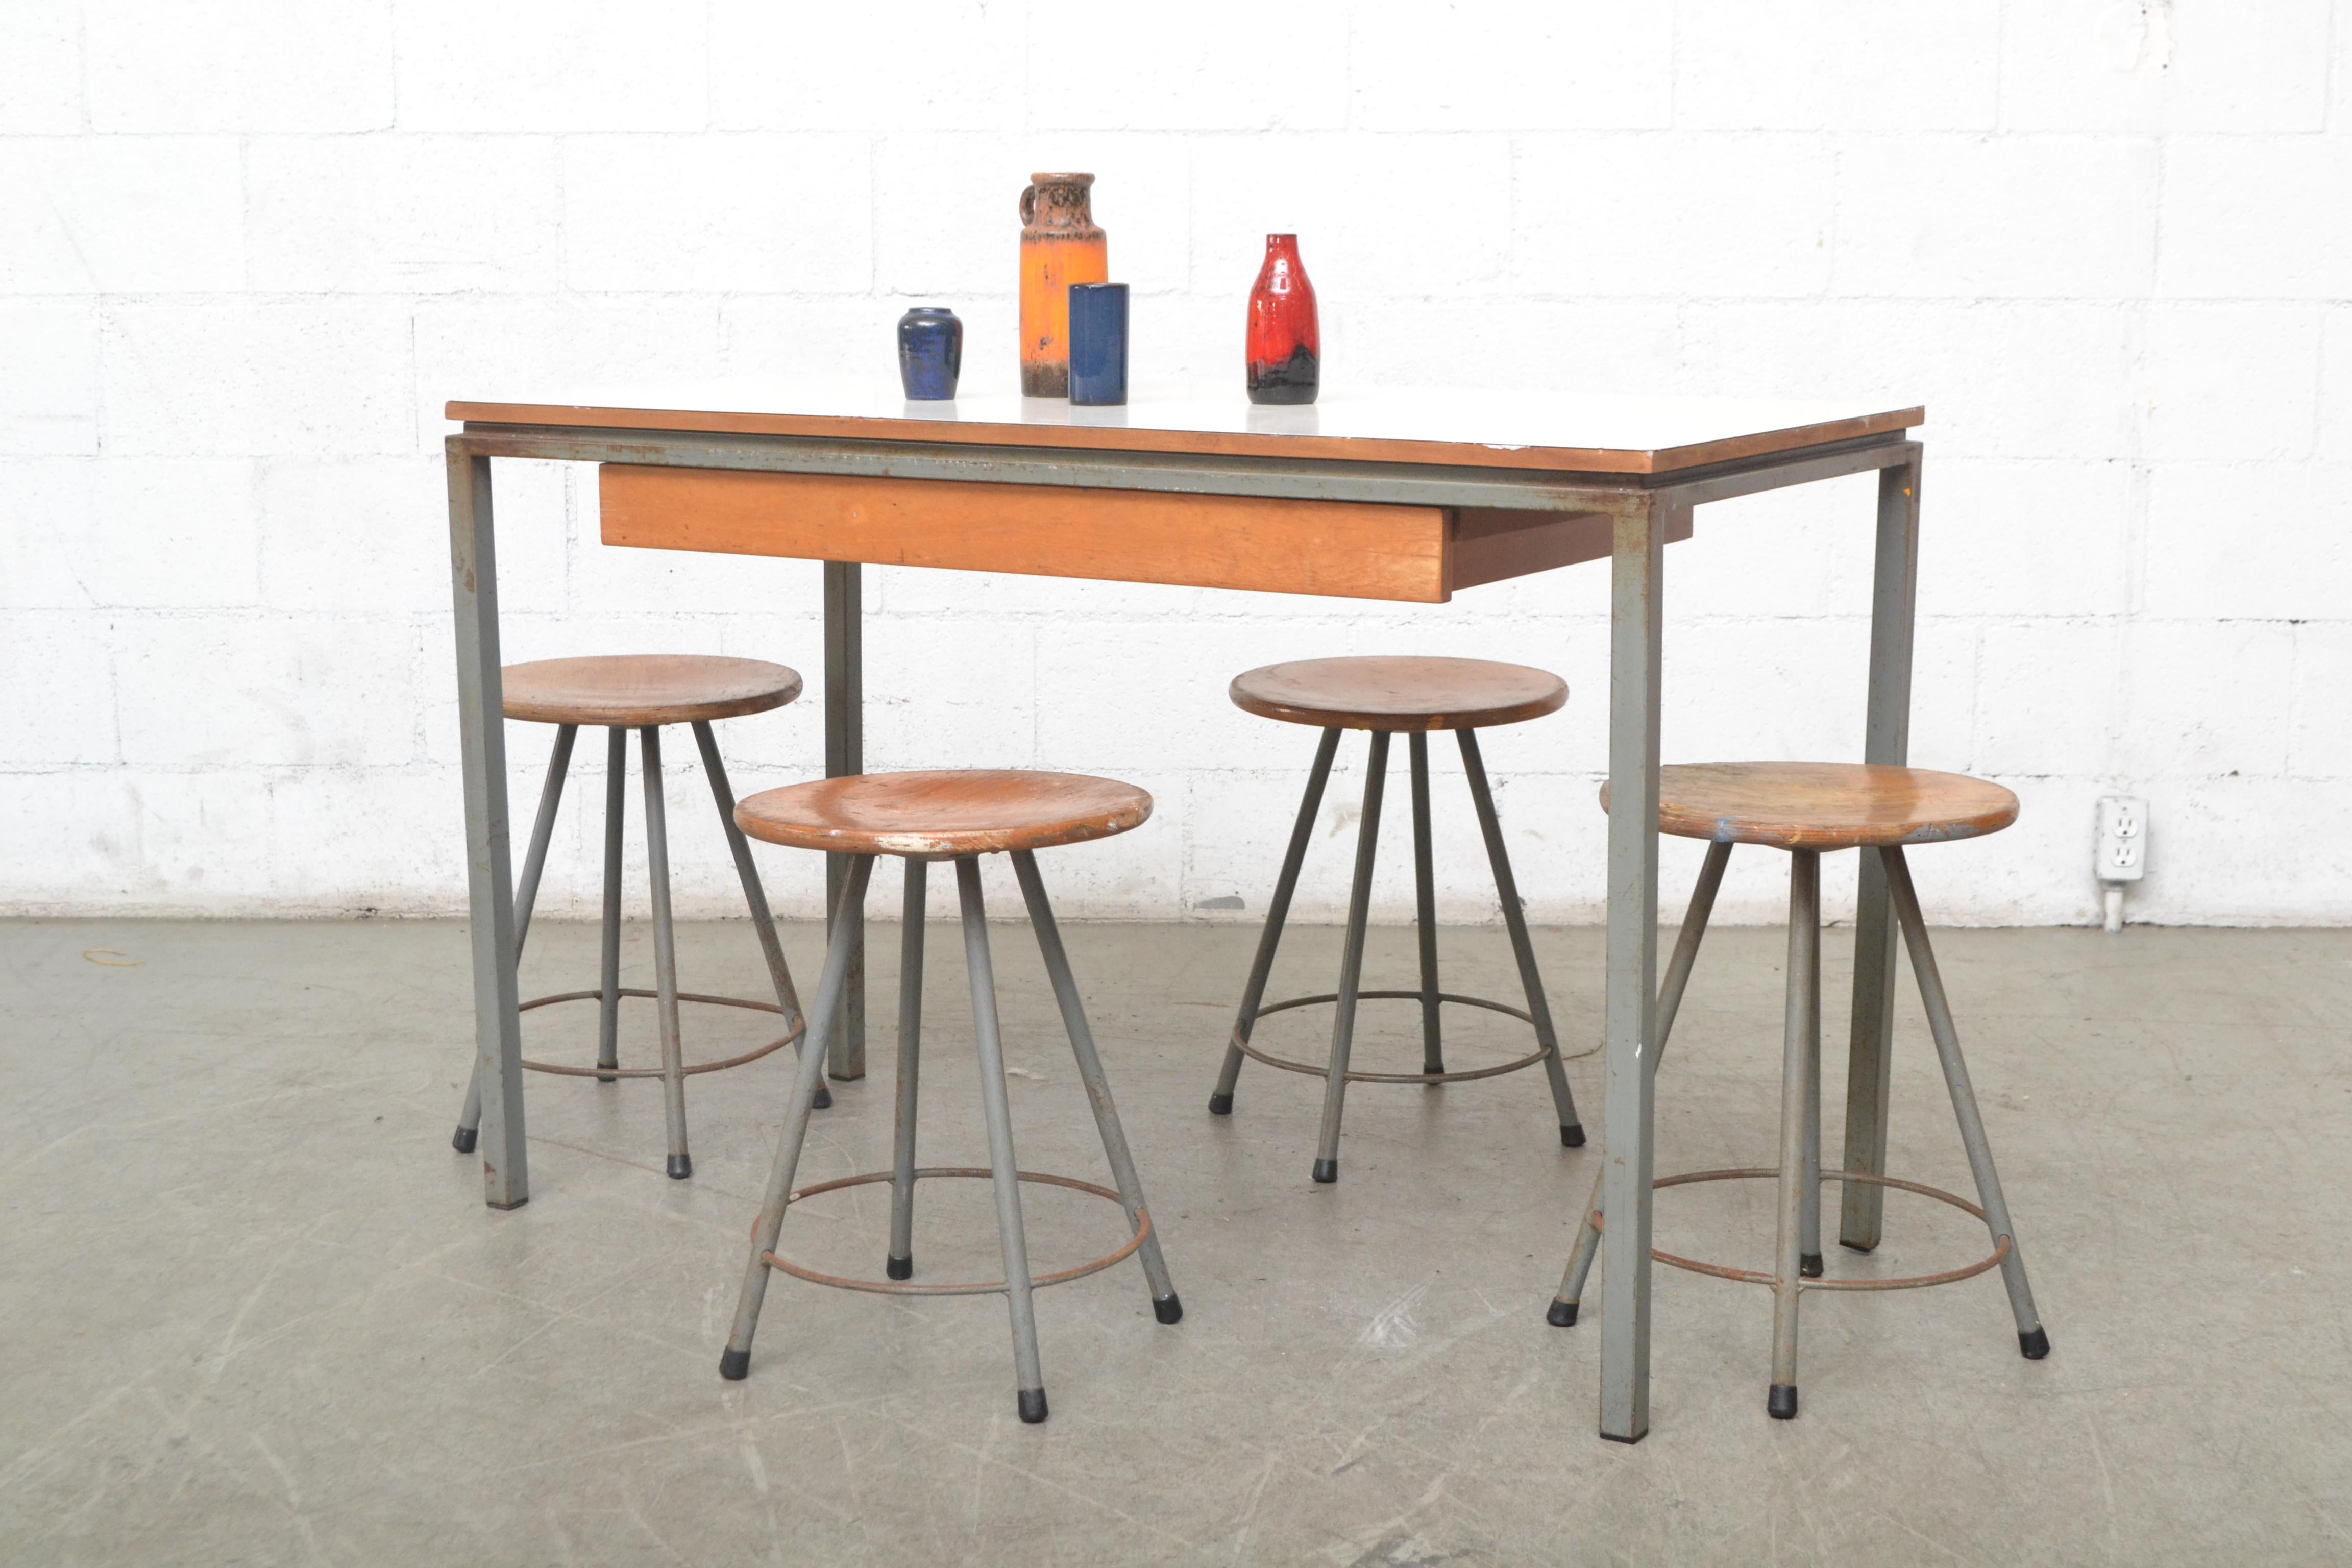 Early edition Marko industrial task or dining table with four matching stools. Both have grey enameled metal tubular frames, lightly refinished natural wood. Table has a white formica top and long storage drawer. Stools measure - 13.25 x 13.25 x